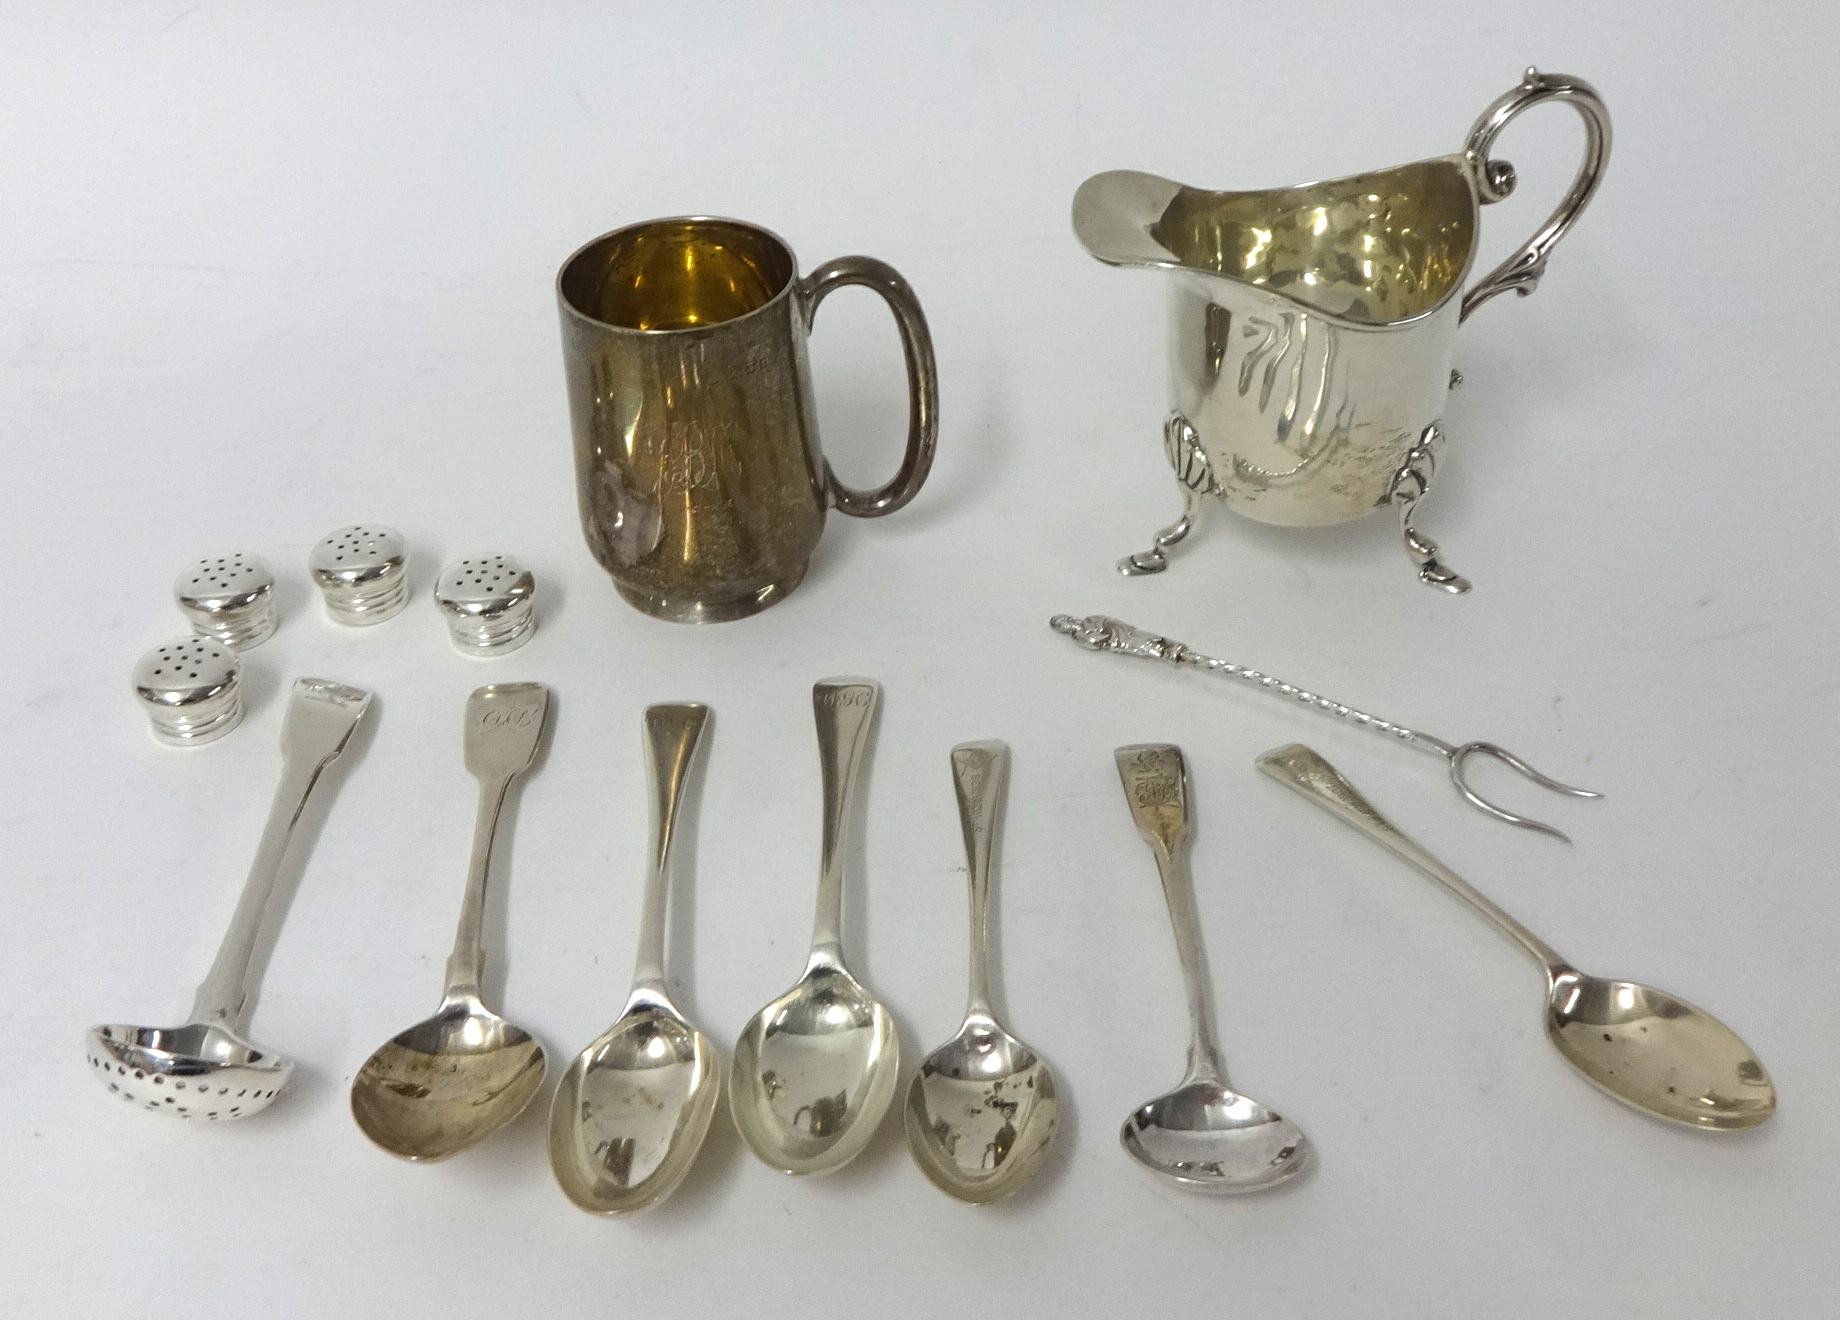 Small silver tankard, silver cream jug, various silver spoons and castor approximately 11.20 oz